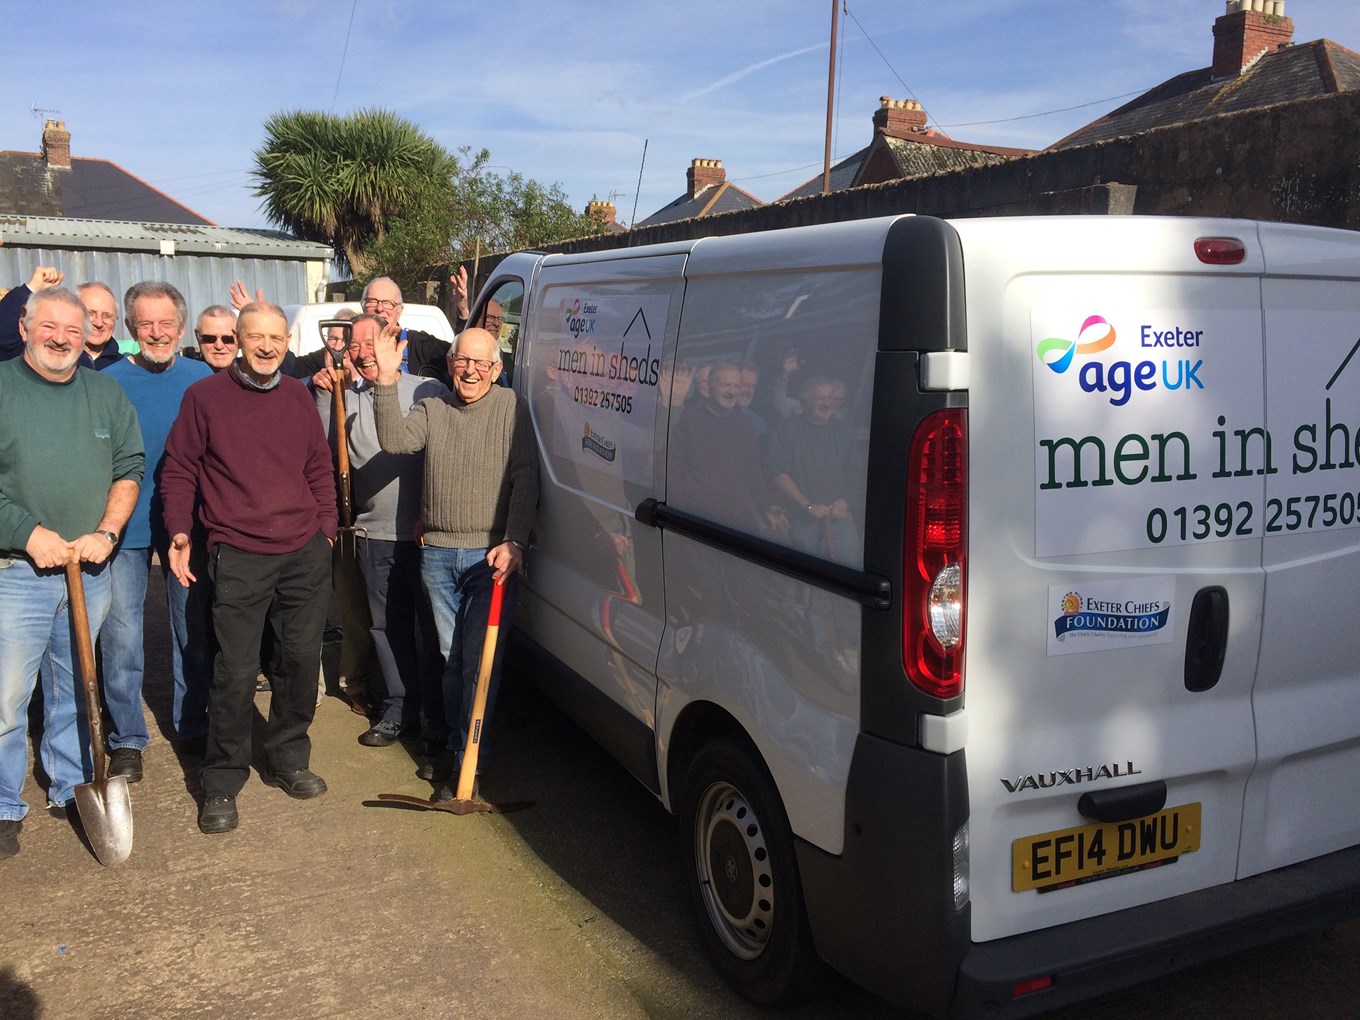 New Vehicle For Age Uk Exeters Men In Sheds Projet